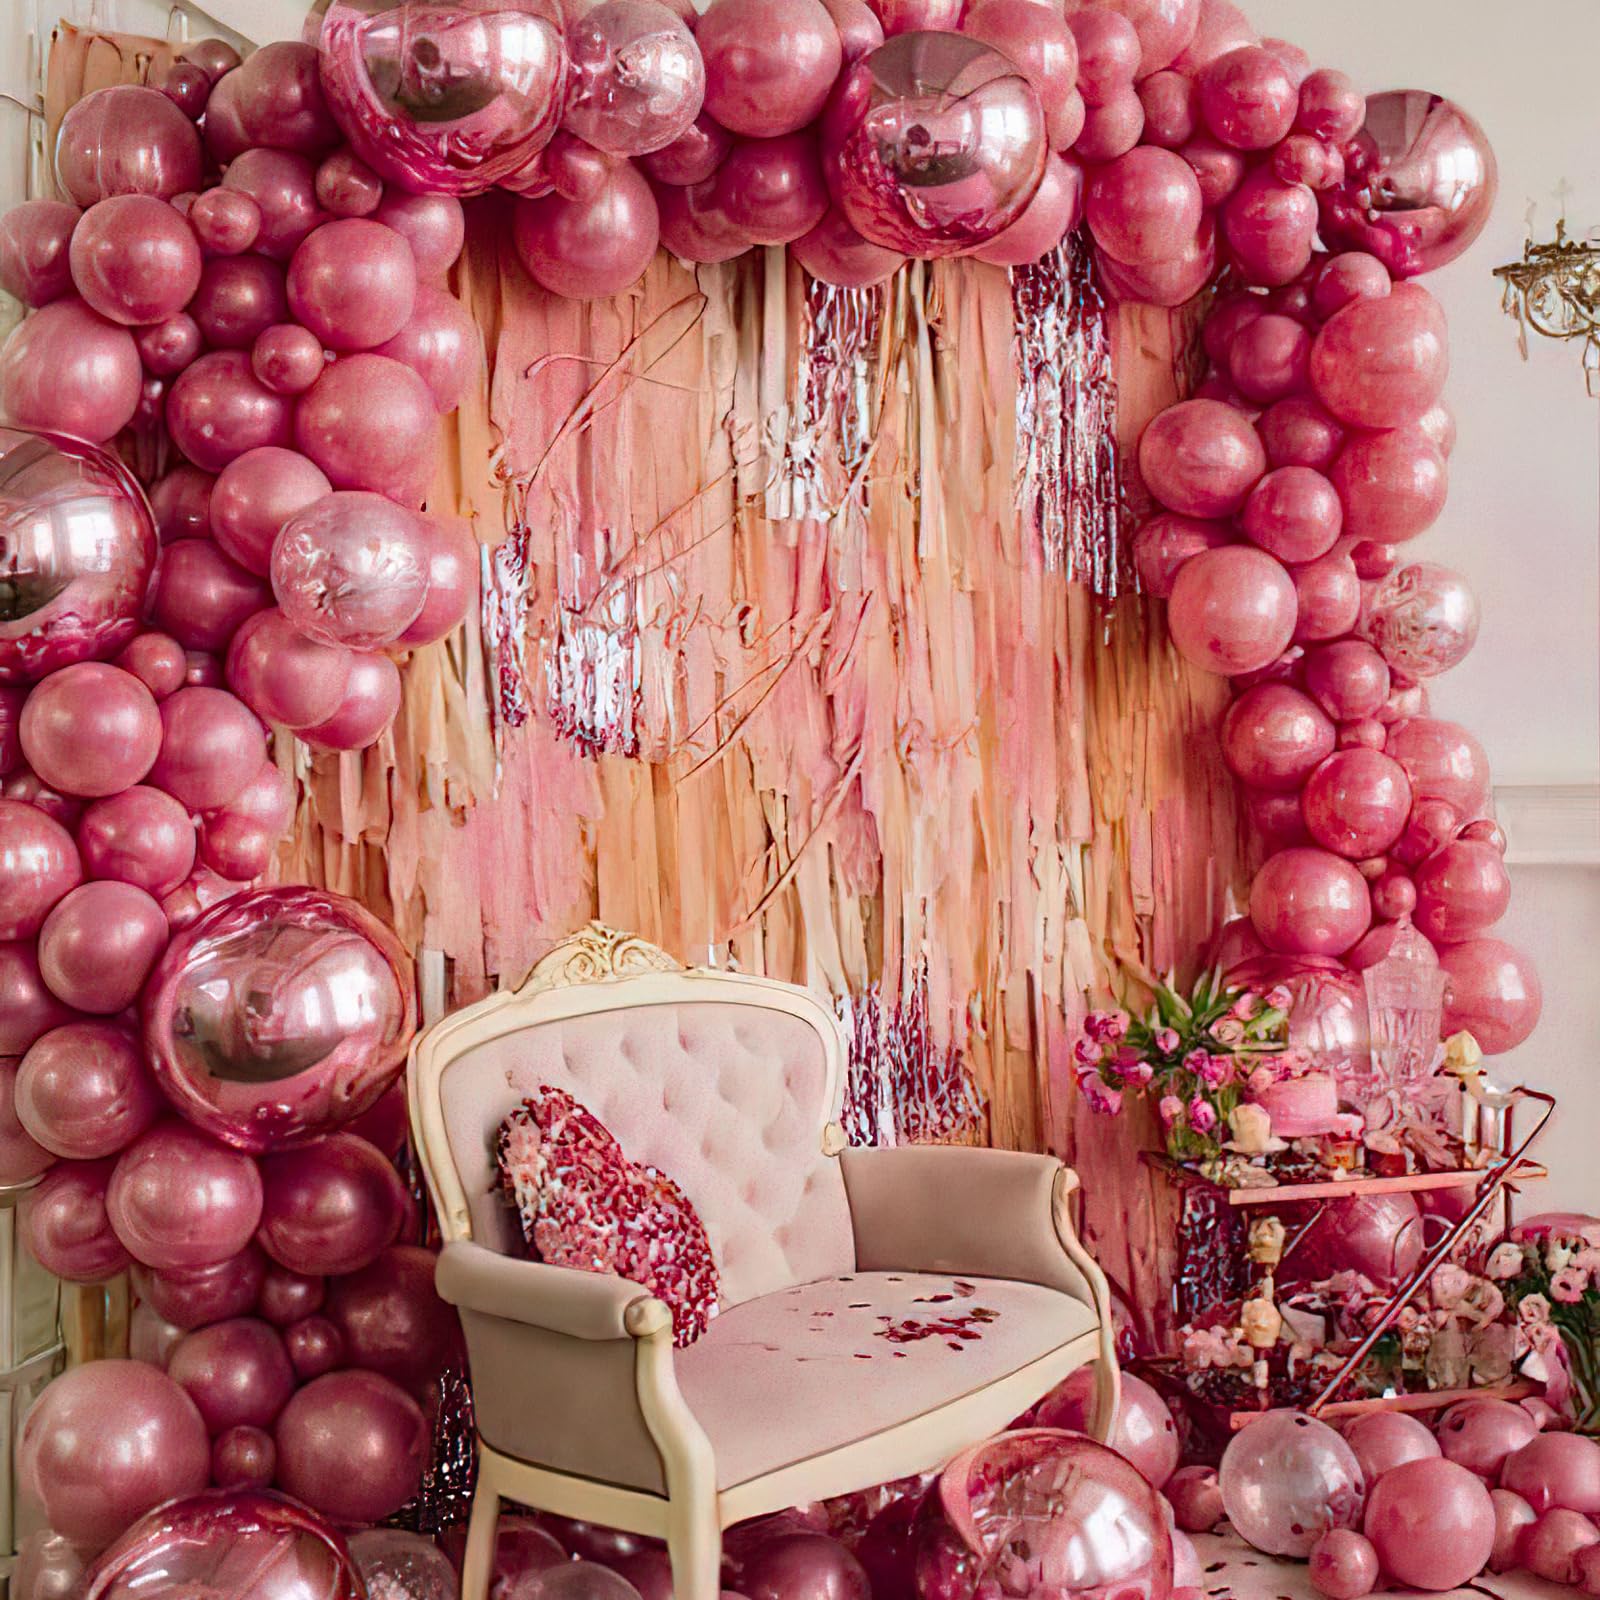 PartyWoo Magenta Balloons, 140 pcs Magenta and Metallic Dark Pink Balloons Different Sizes Pack of 18 Inch 12 Inch 10 Inch 5 Inch for Balloon Garland or Arch as Birthday Decorations, Party Decorations